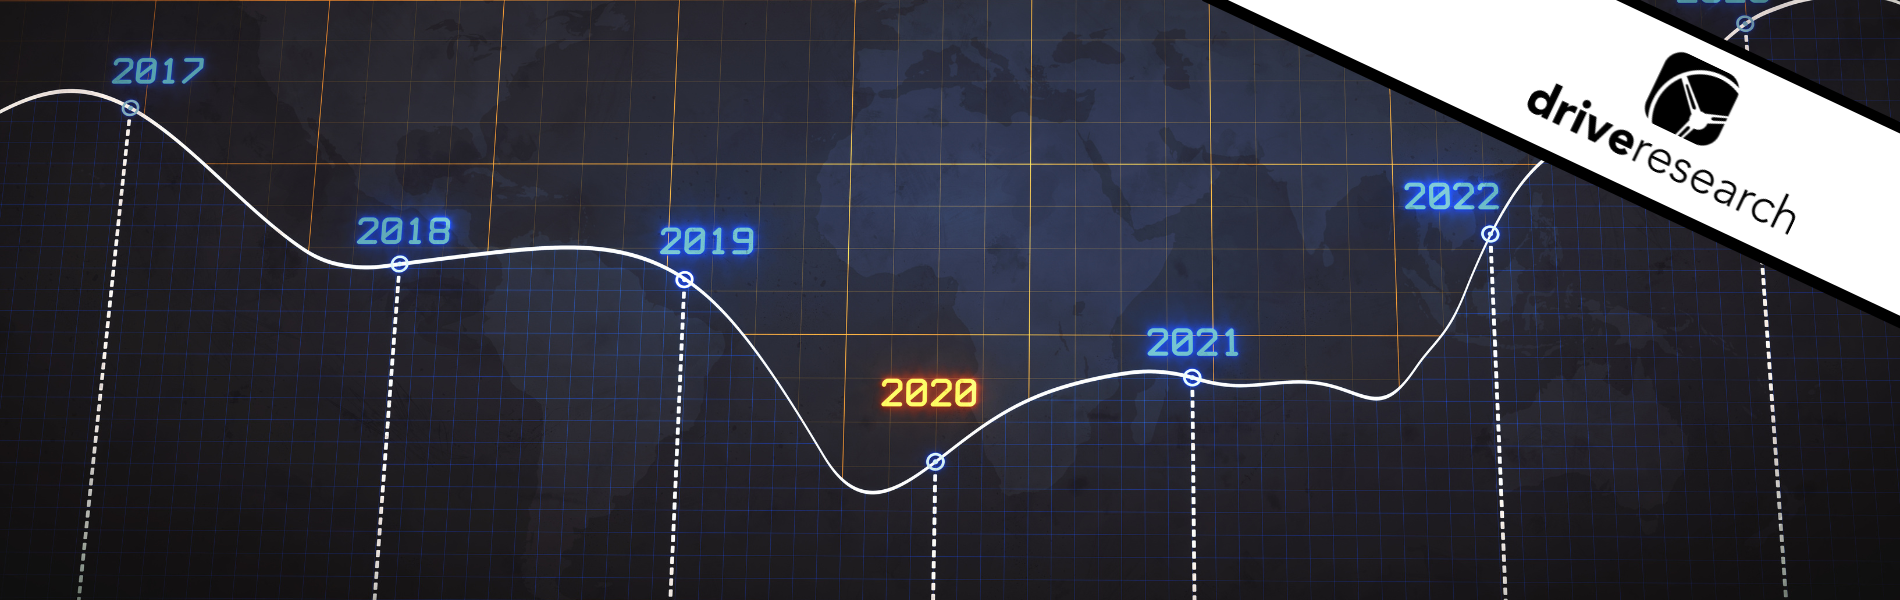 timeline from 2017 to 2022